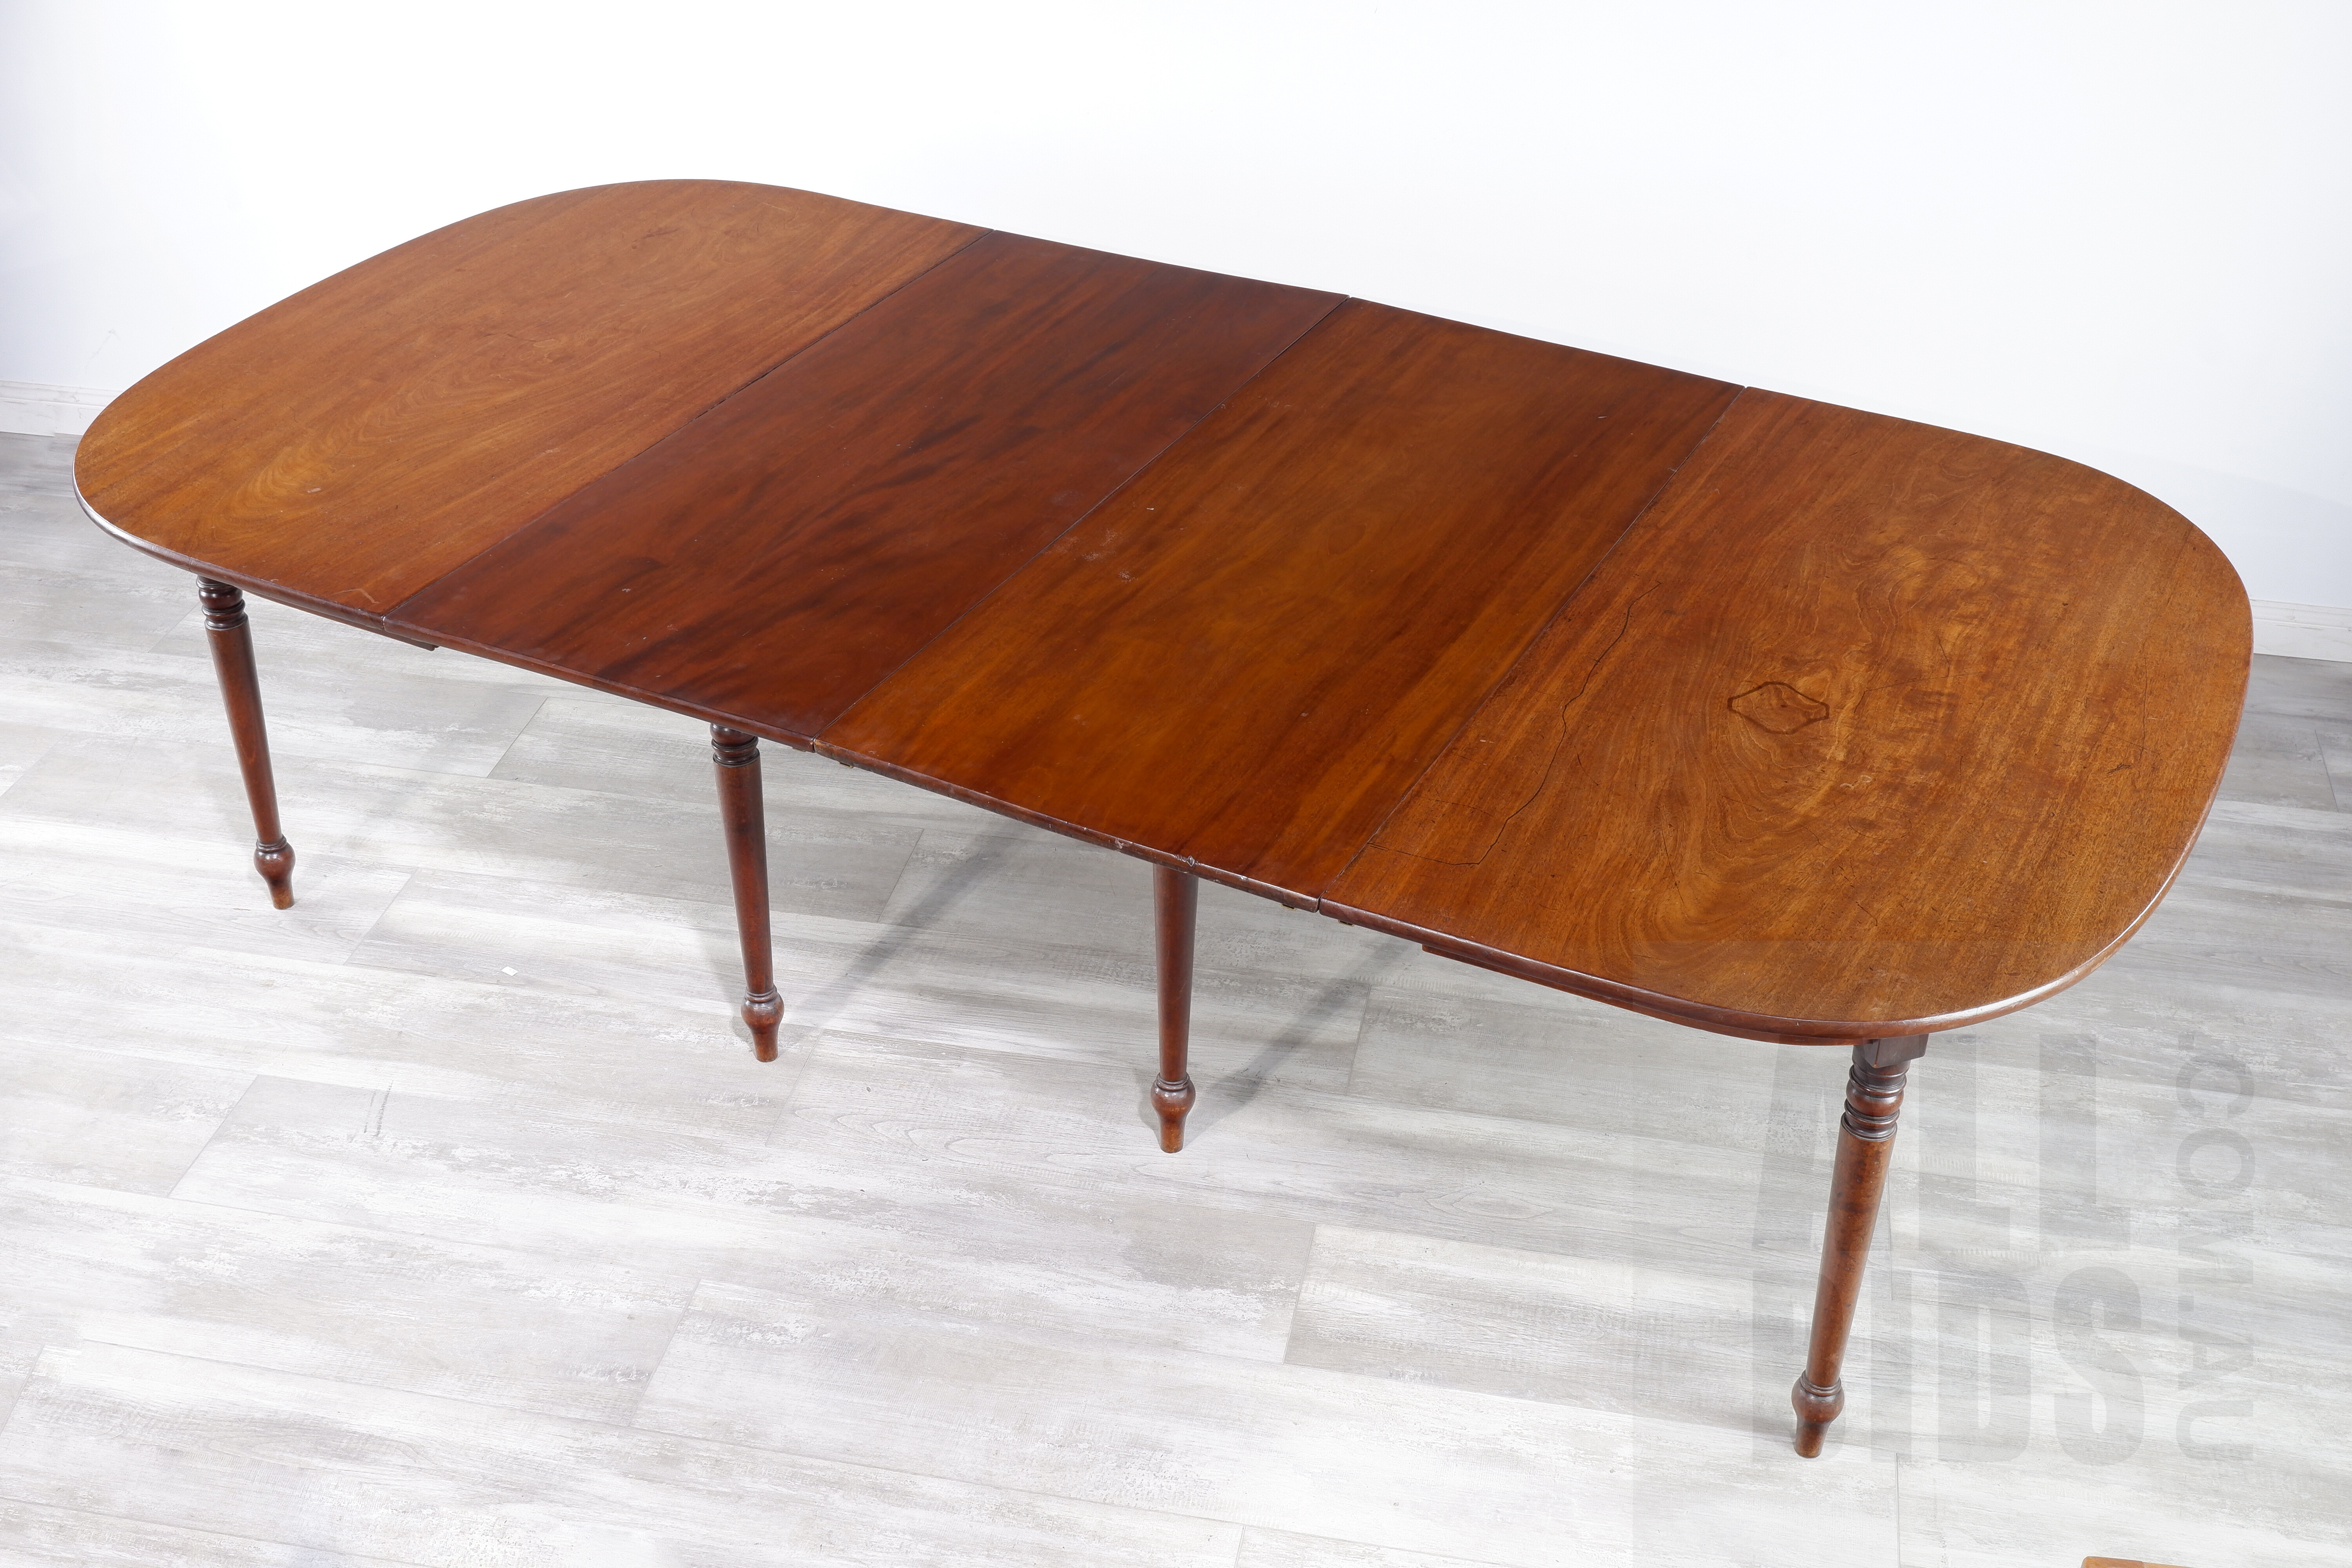 'Early Victorian Mahogany Two Leaf Extension Dining Table, Circa 1840s'